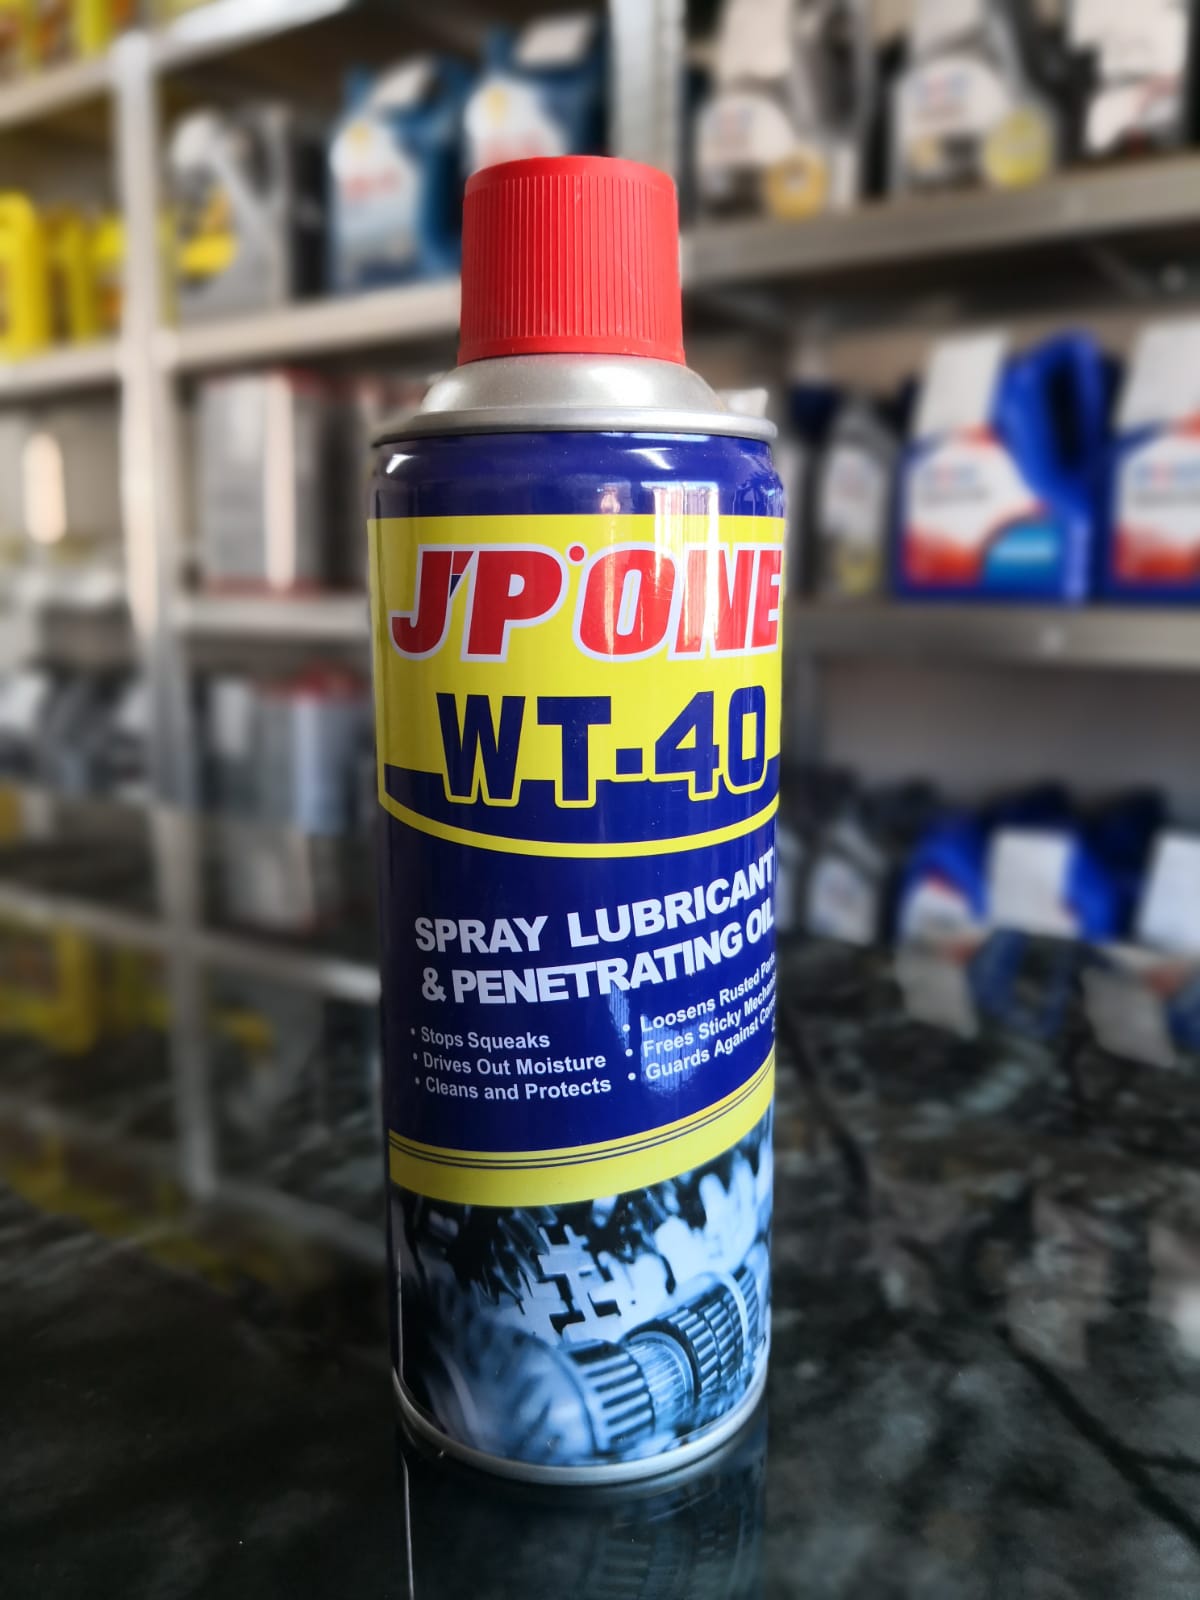 WT-40 LUBRICANTE MULTIPROPOSITO JP-ONE